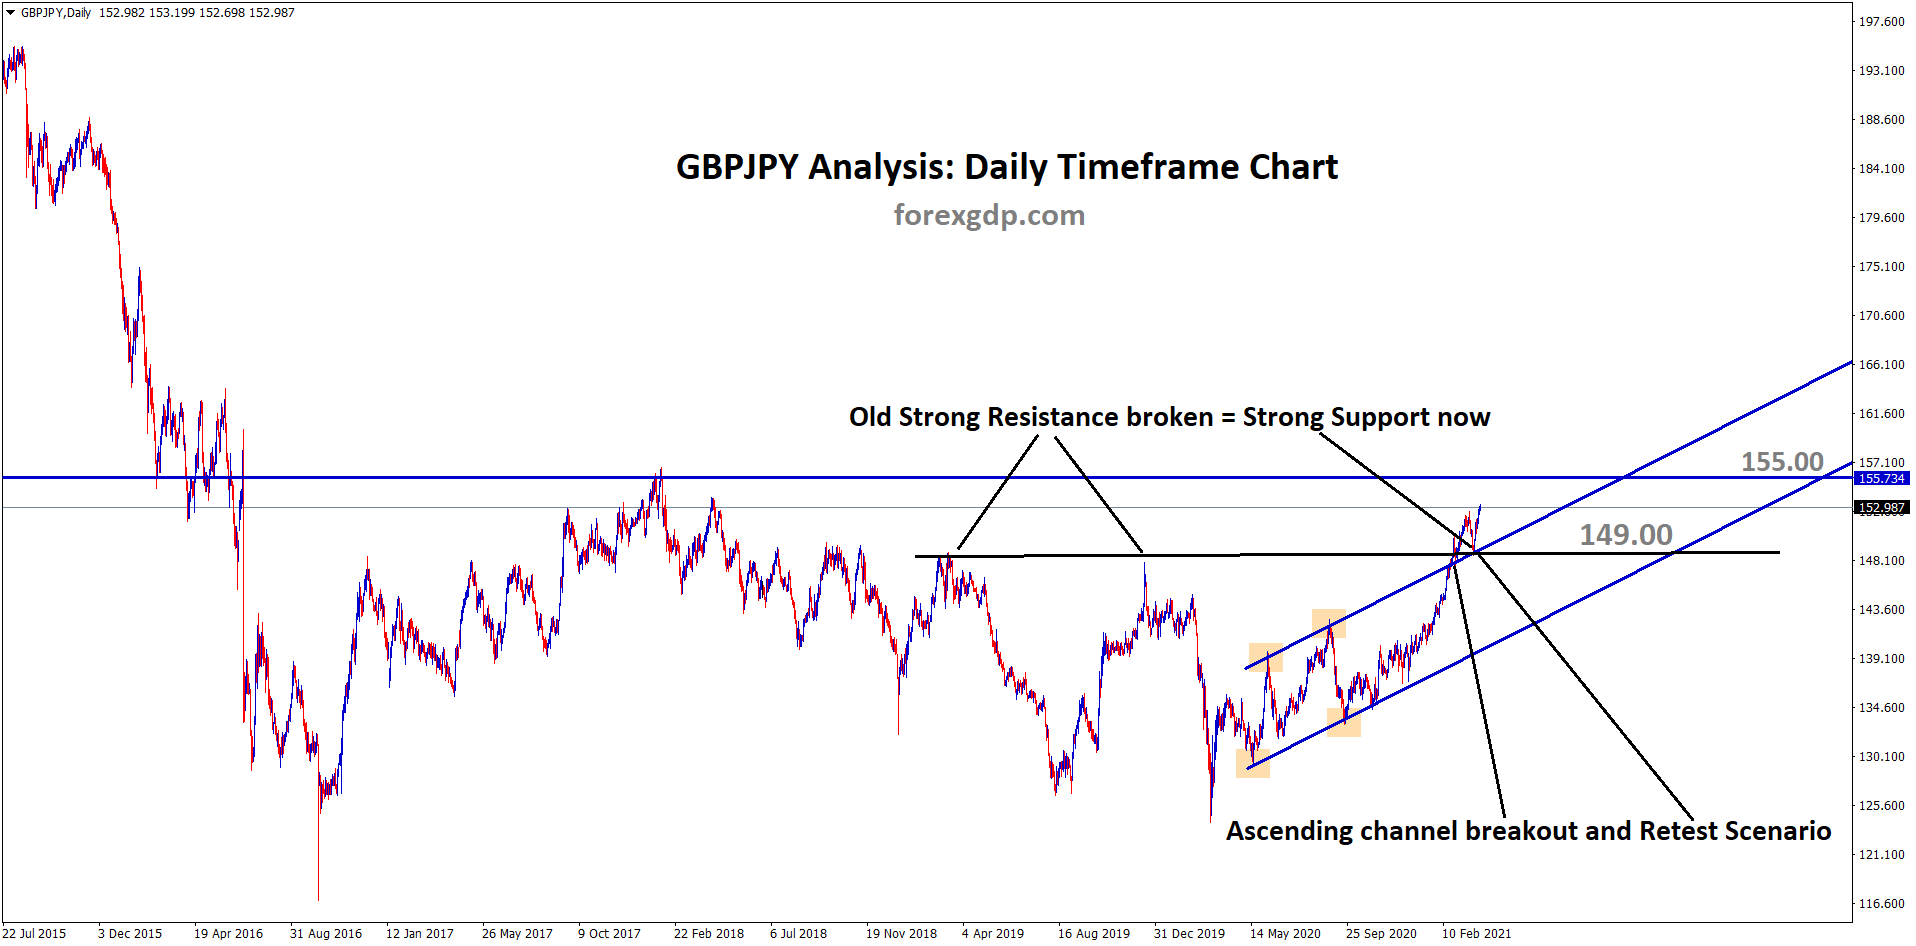 gbpjpy old resistance act as new support zone and ascending channel breakout retest scenario